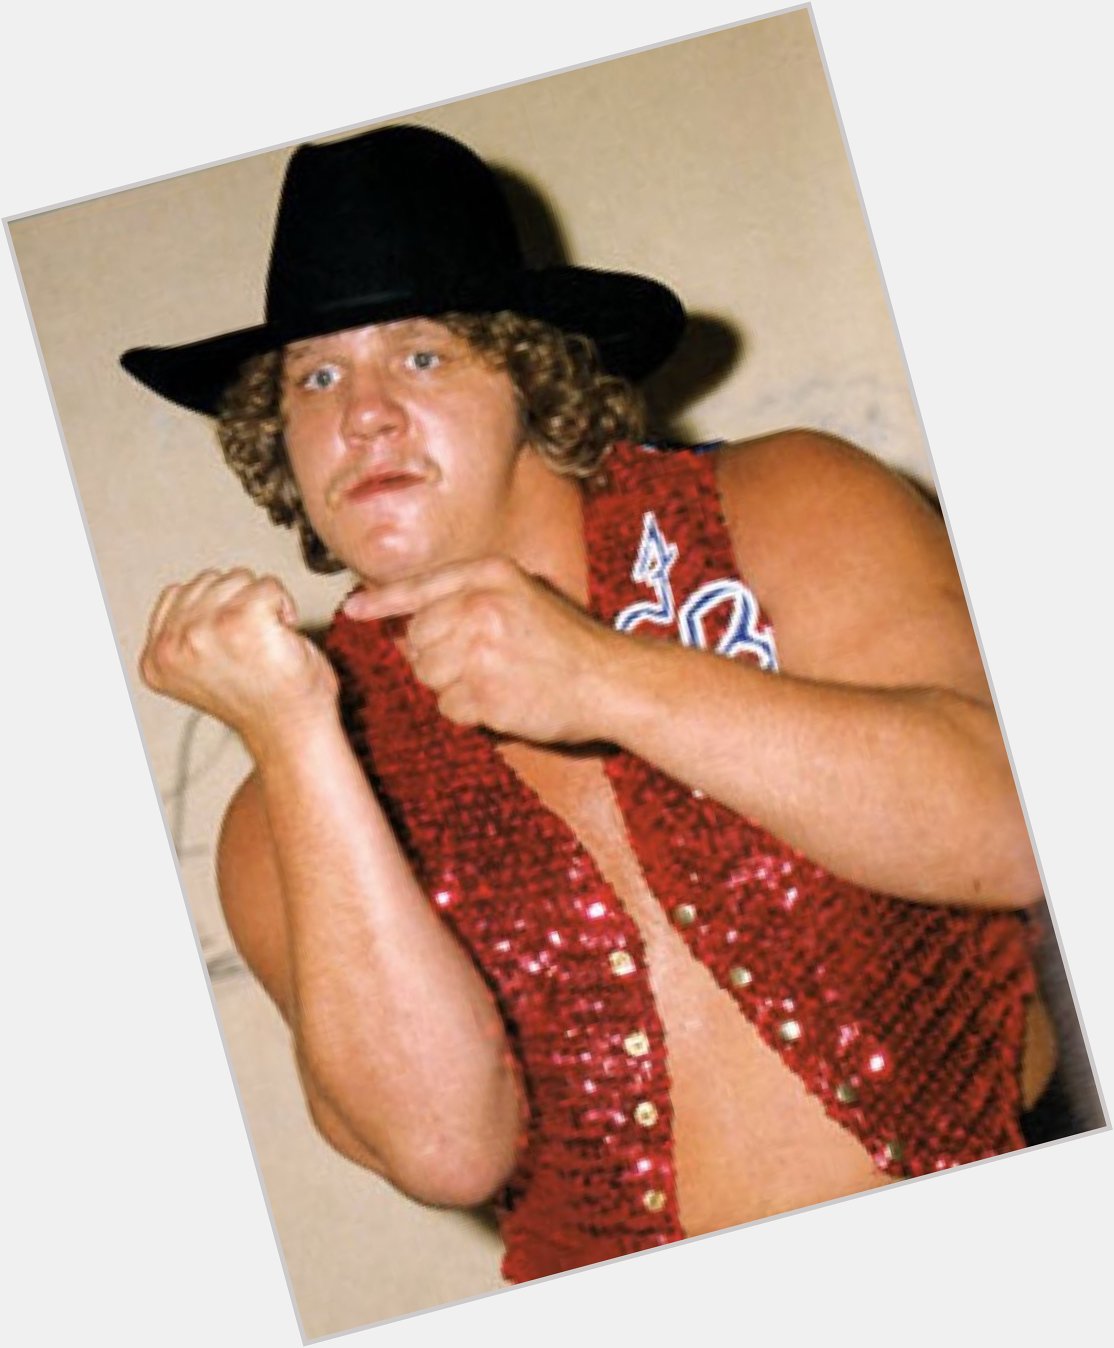 Happy Birthday Terry Gordy! One of the best big men ever! 